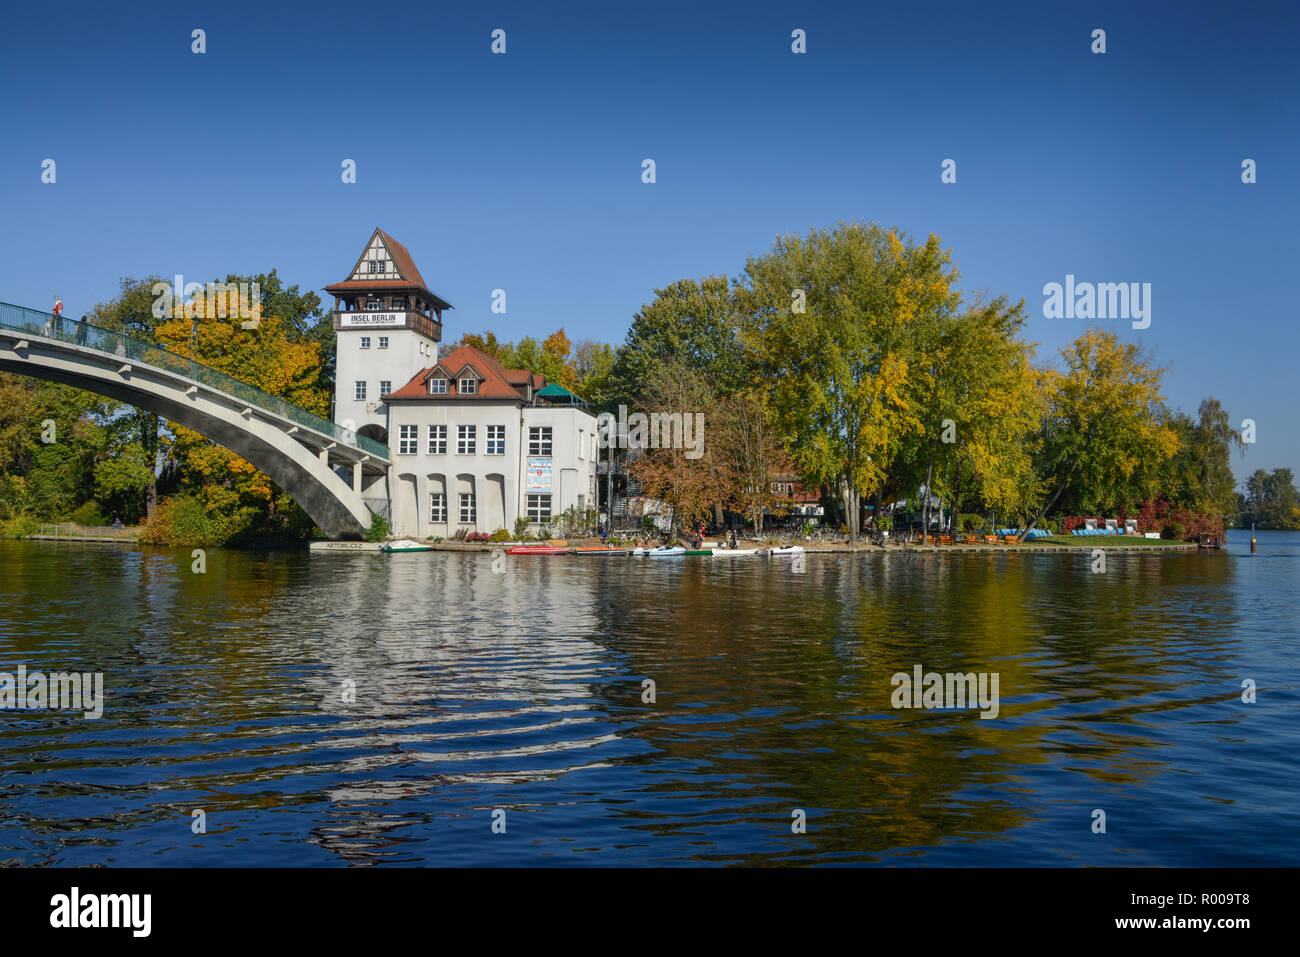 Island of the youth, Treptow, Berlin, Germany, Insel der Jugend, Deutschland Stock Photo